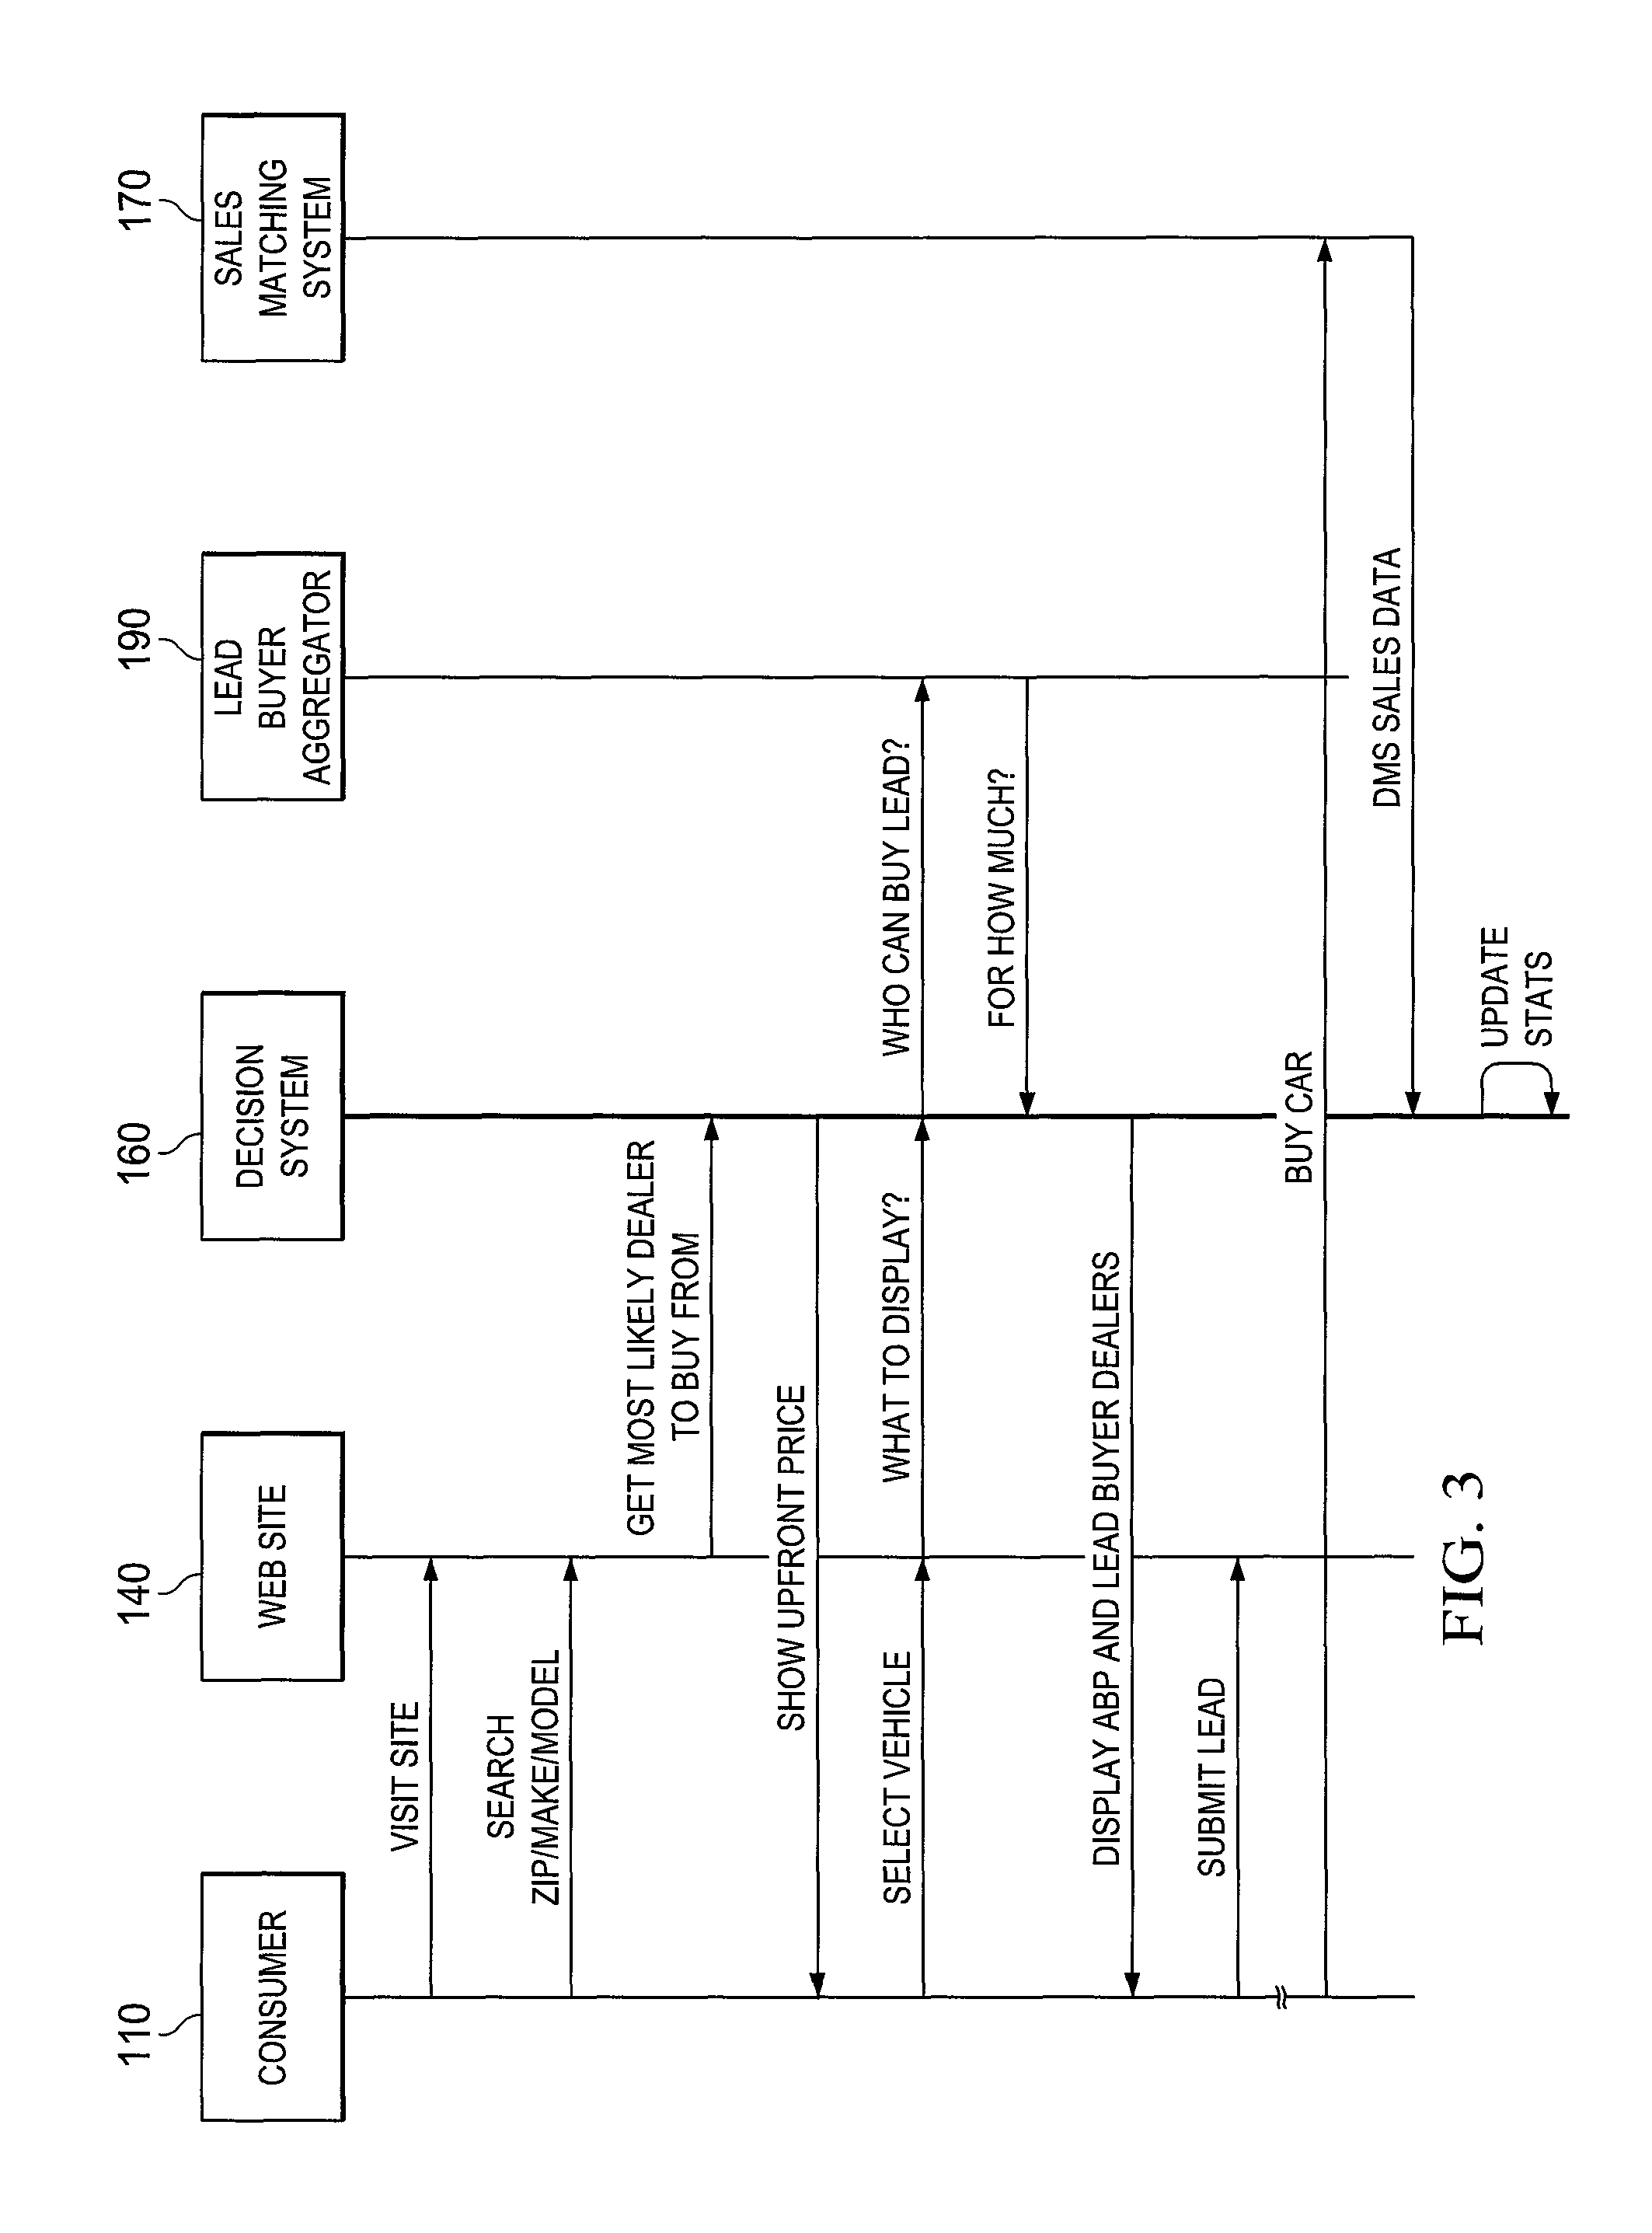 System, method and computer program product for predicting value of lead